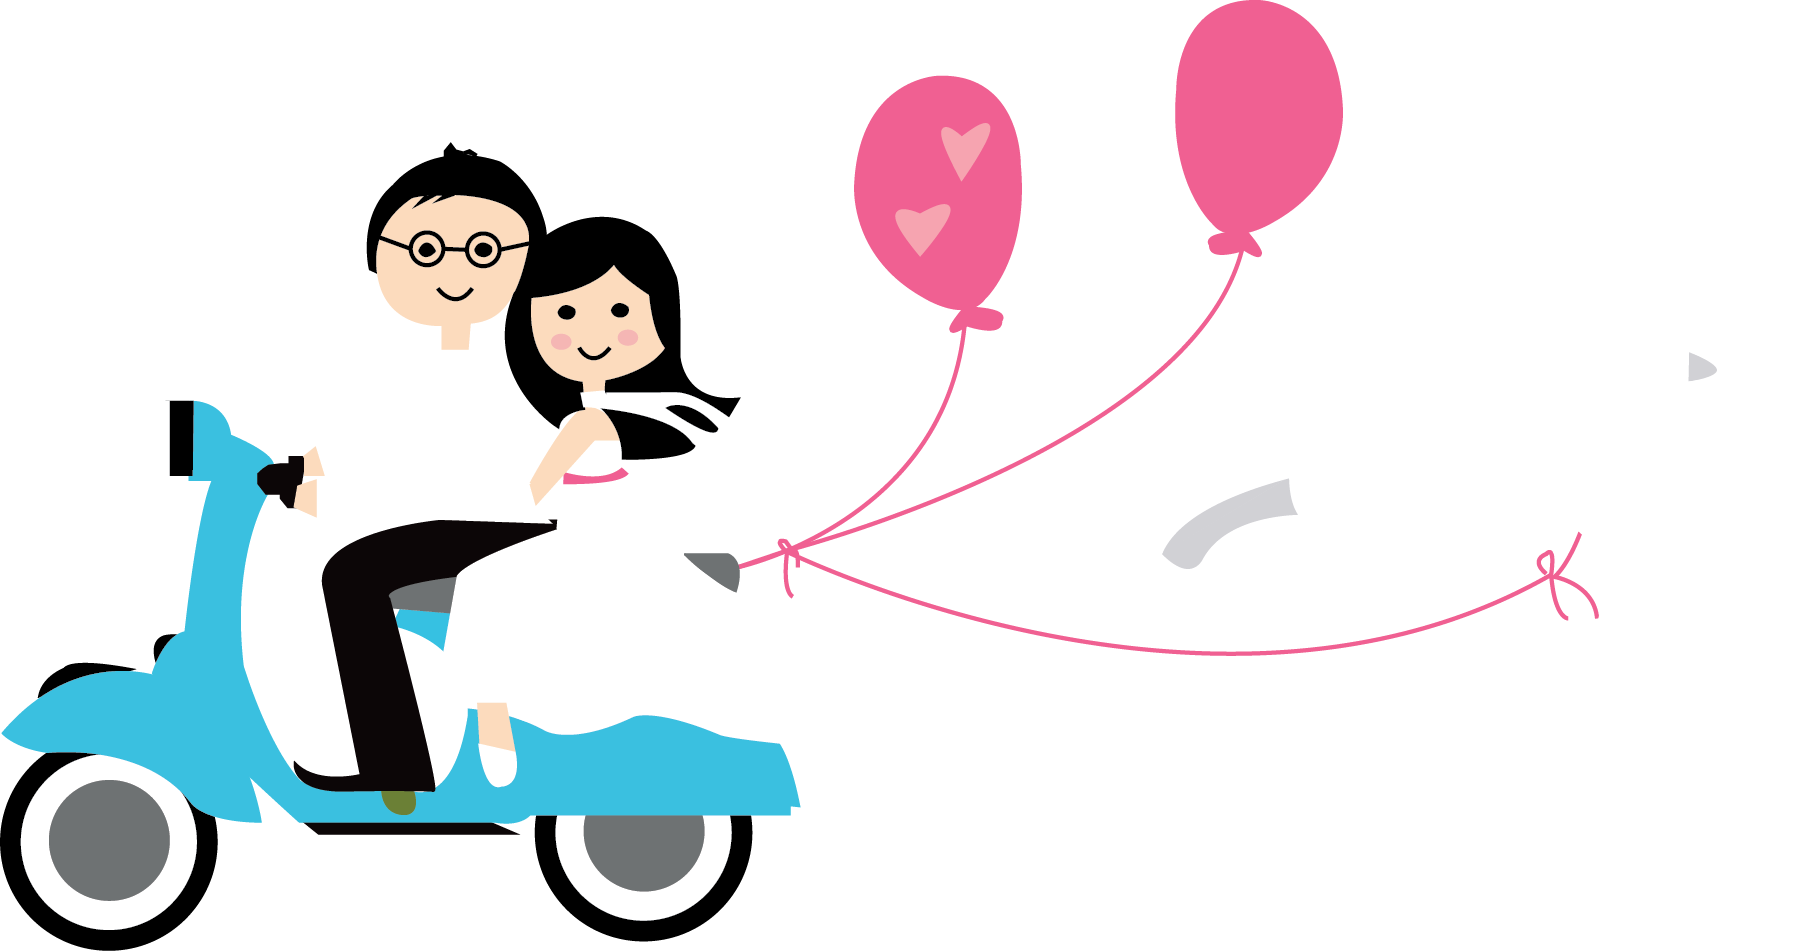 Download and share clipart about Wedding Vespa Kartun, Find more high quali...